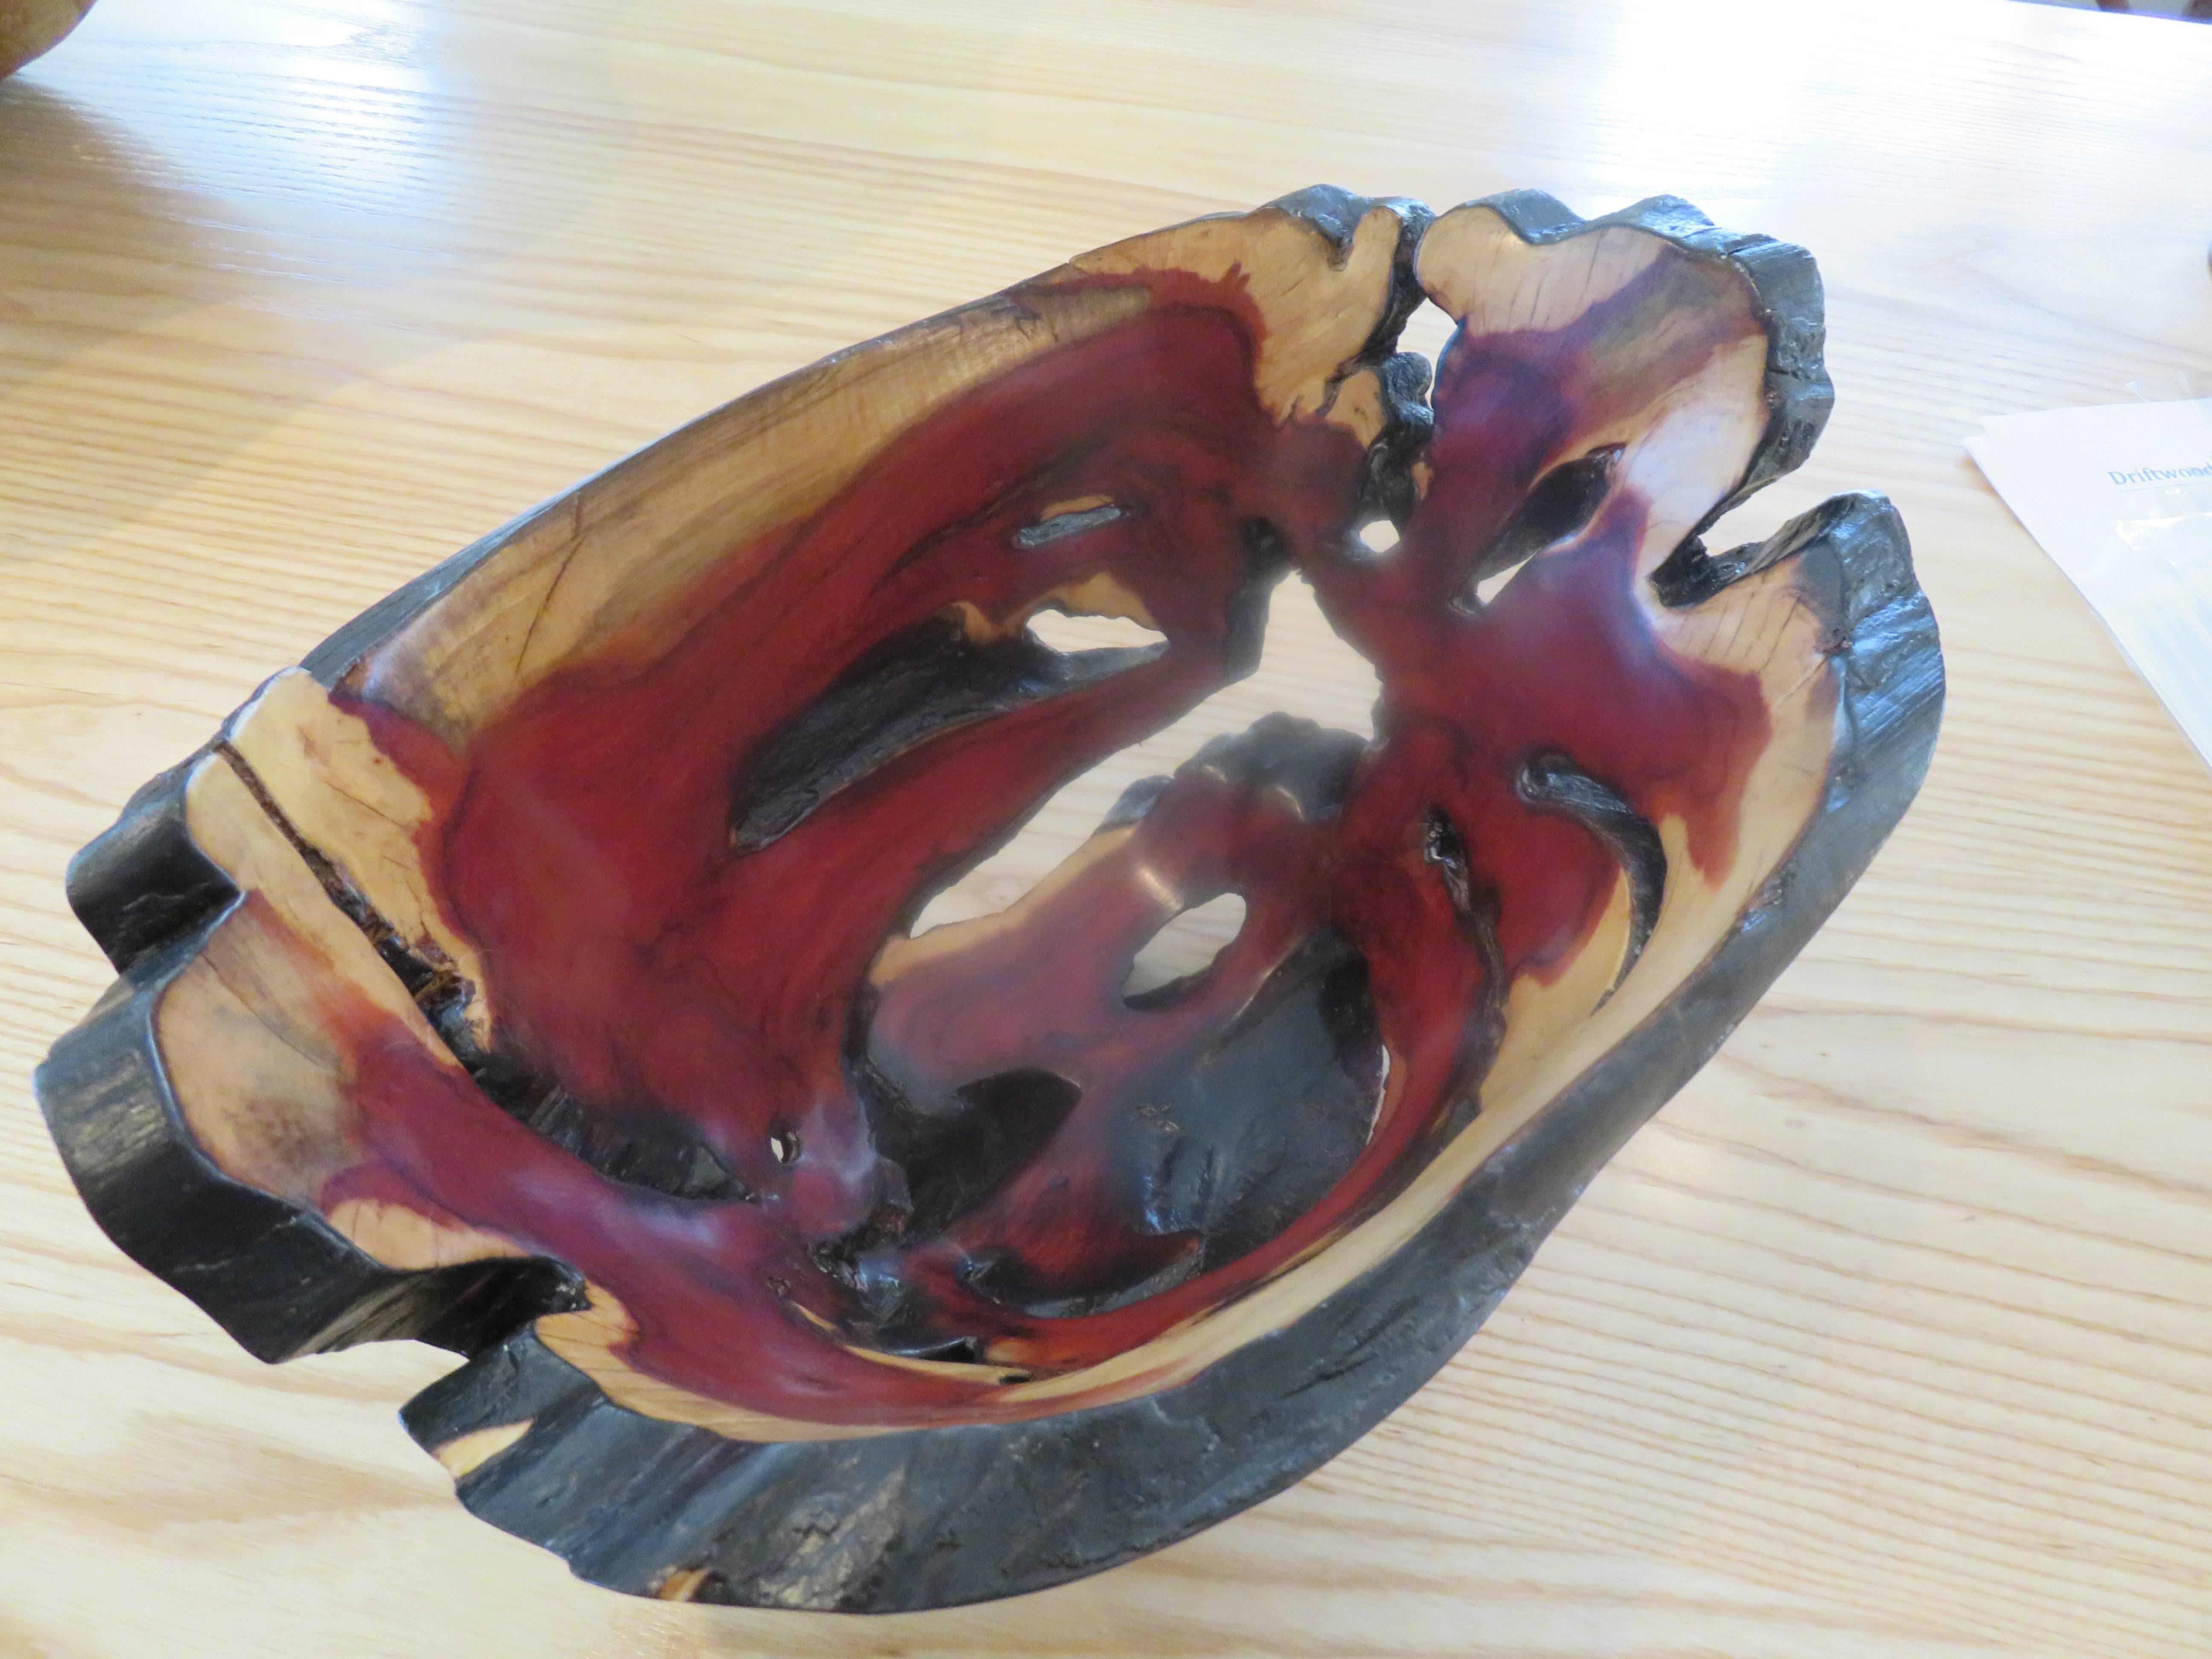 A rare find in this magnificent Brazil wood live edge bowl. Natural to the wood are these deep cranberry reds and light ash tones, superb craftsmanship, three available, all with different forms and tones.